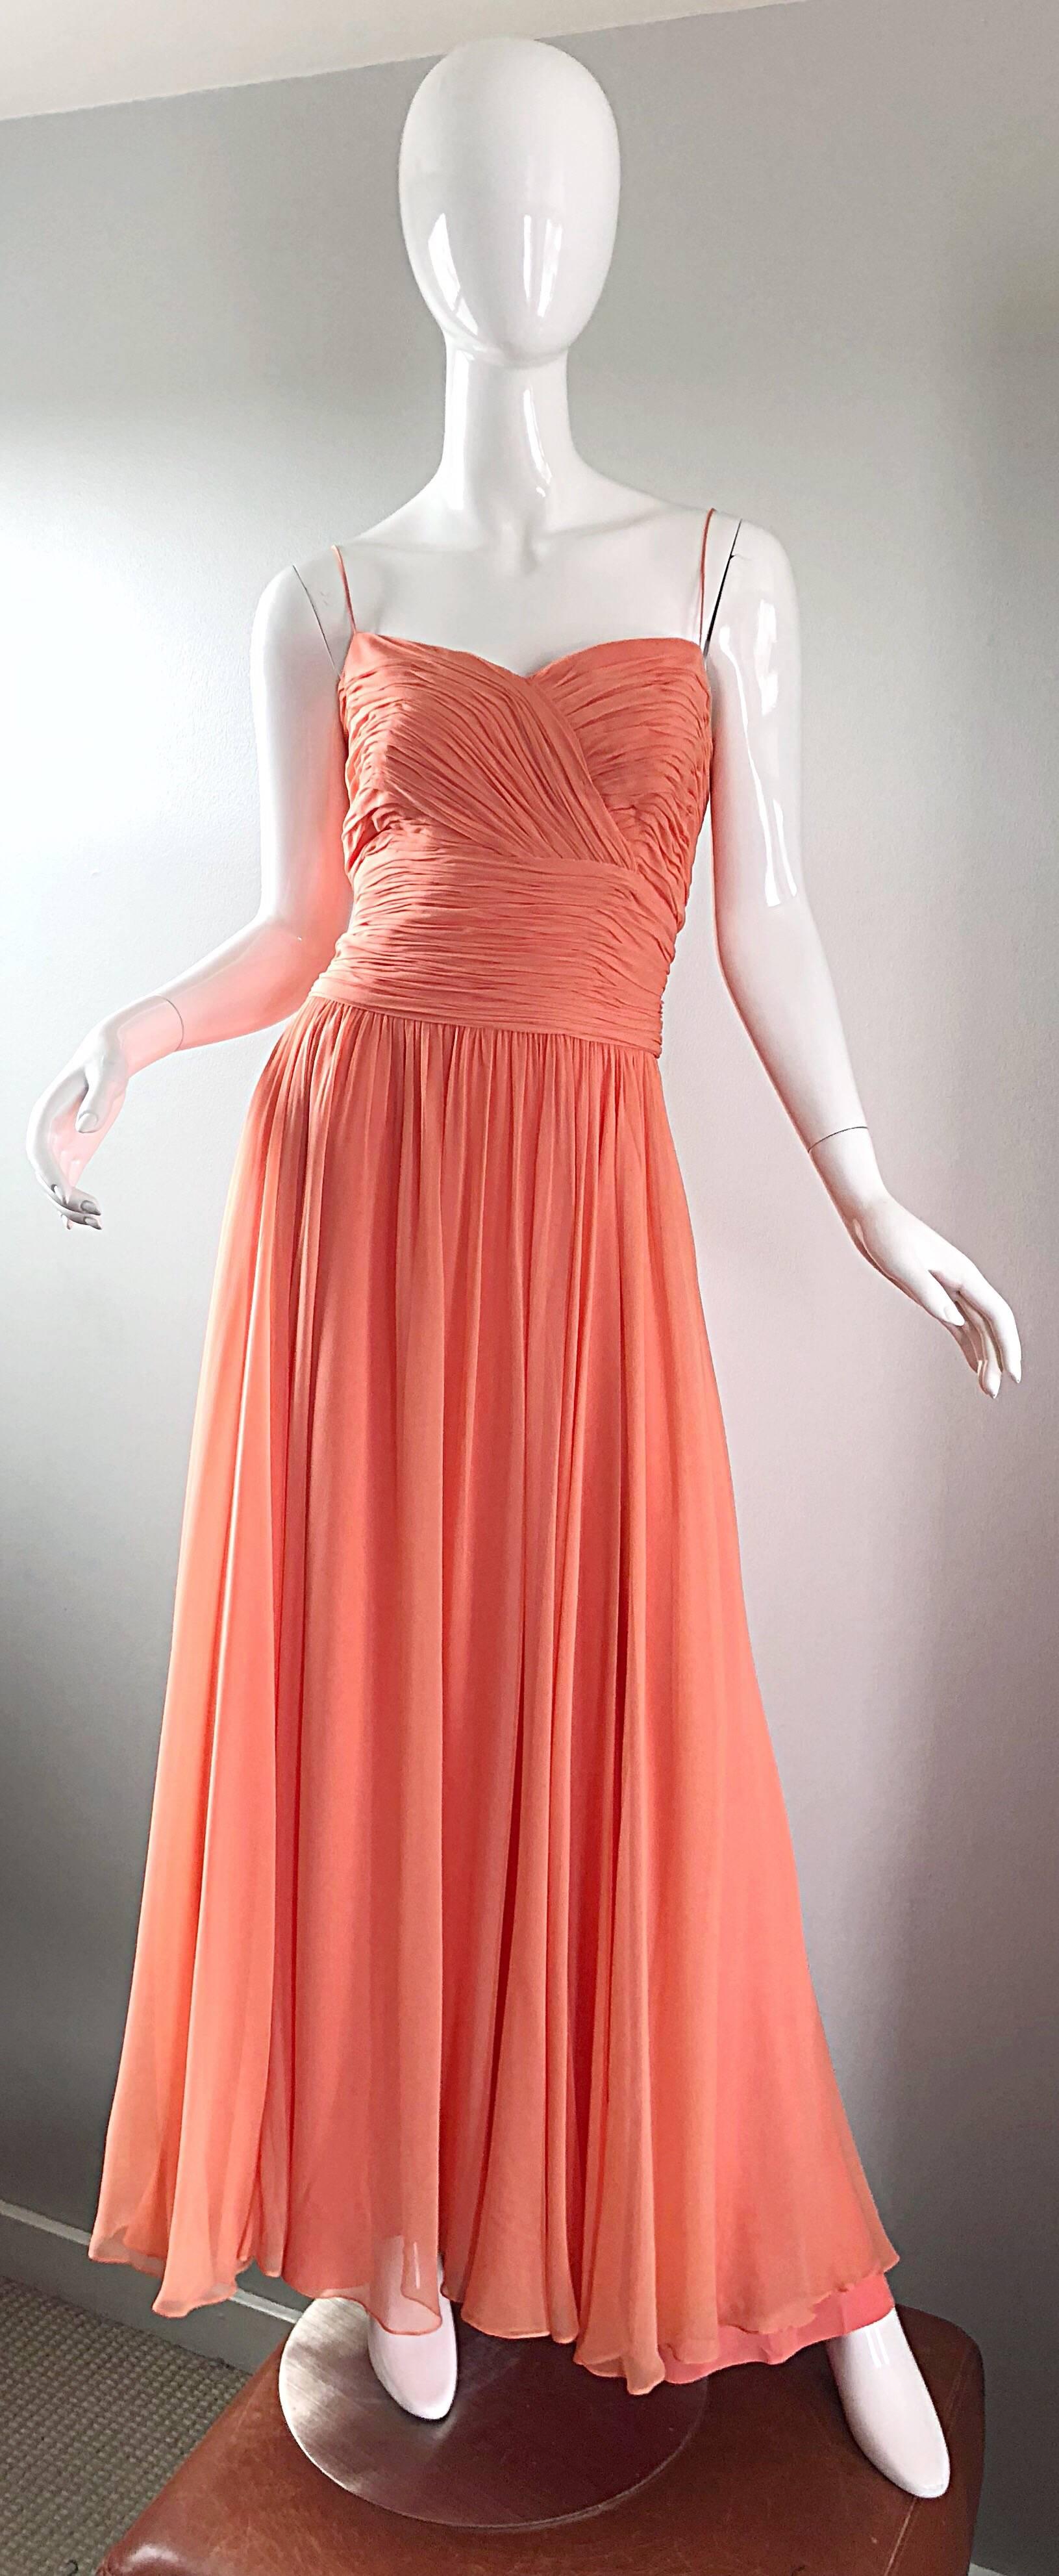 Gorgeous 1950s SAKS 5th AVENUE salmon, coral pink silk chiffon demi couture gown! Words cannot even begin to describe the quality, construction, color and design of this masterpiece! Flattering ruched bodice with thin spaghetti straps. Layers and